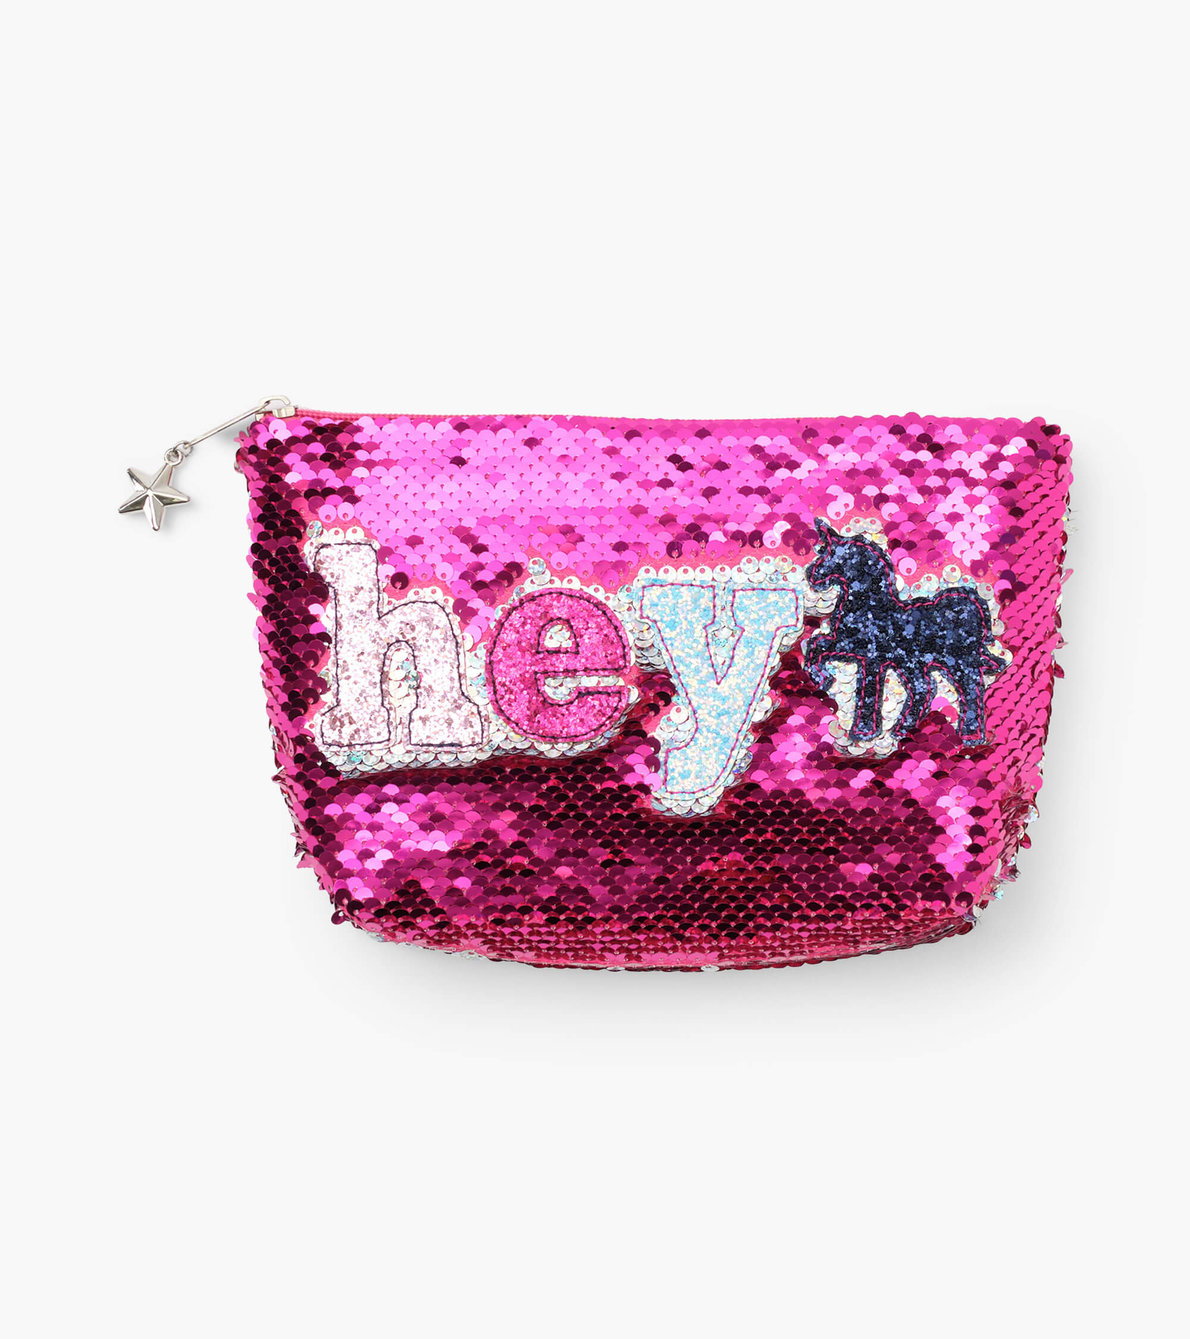 View larger image of Sparkling Unicorn Treasure Pouch